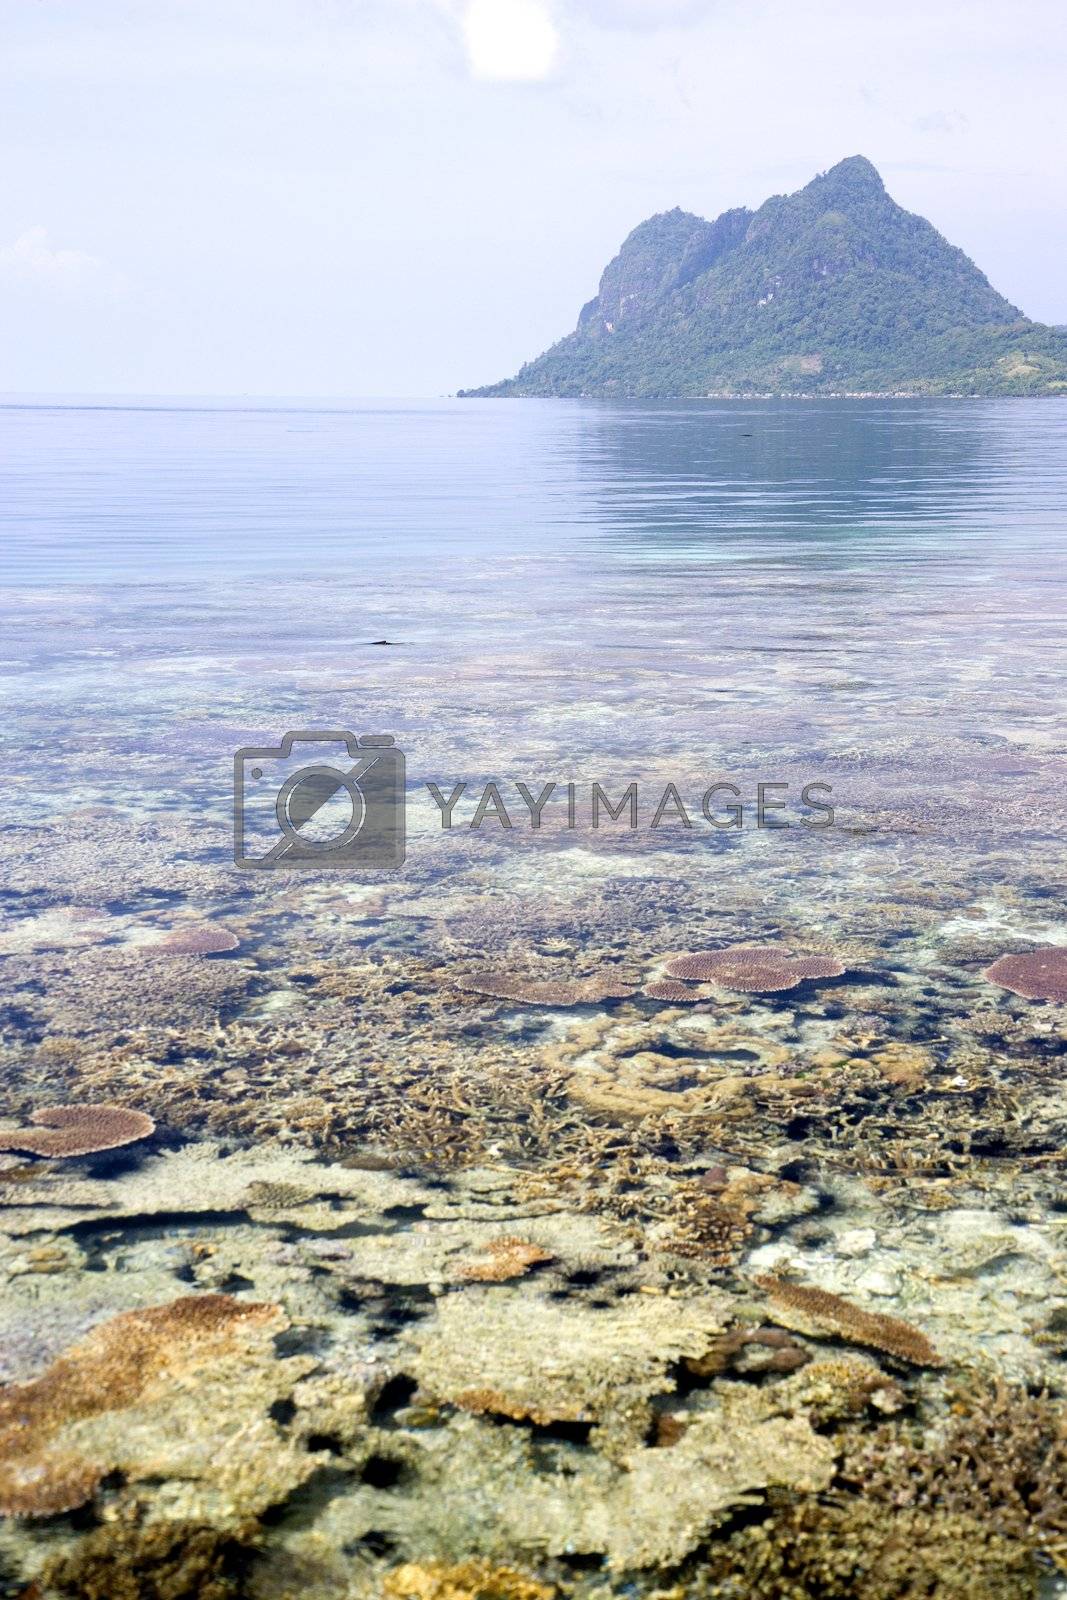 Royalty free image of Coral Reef and Island by shariffc